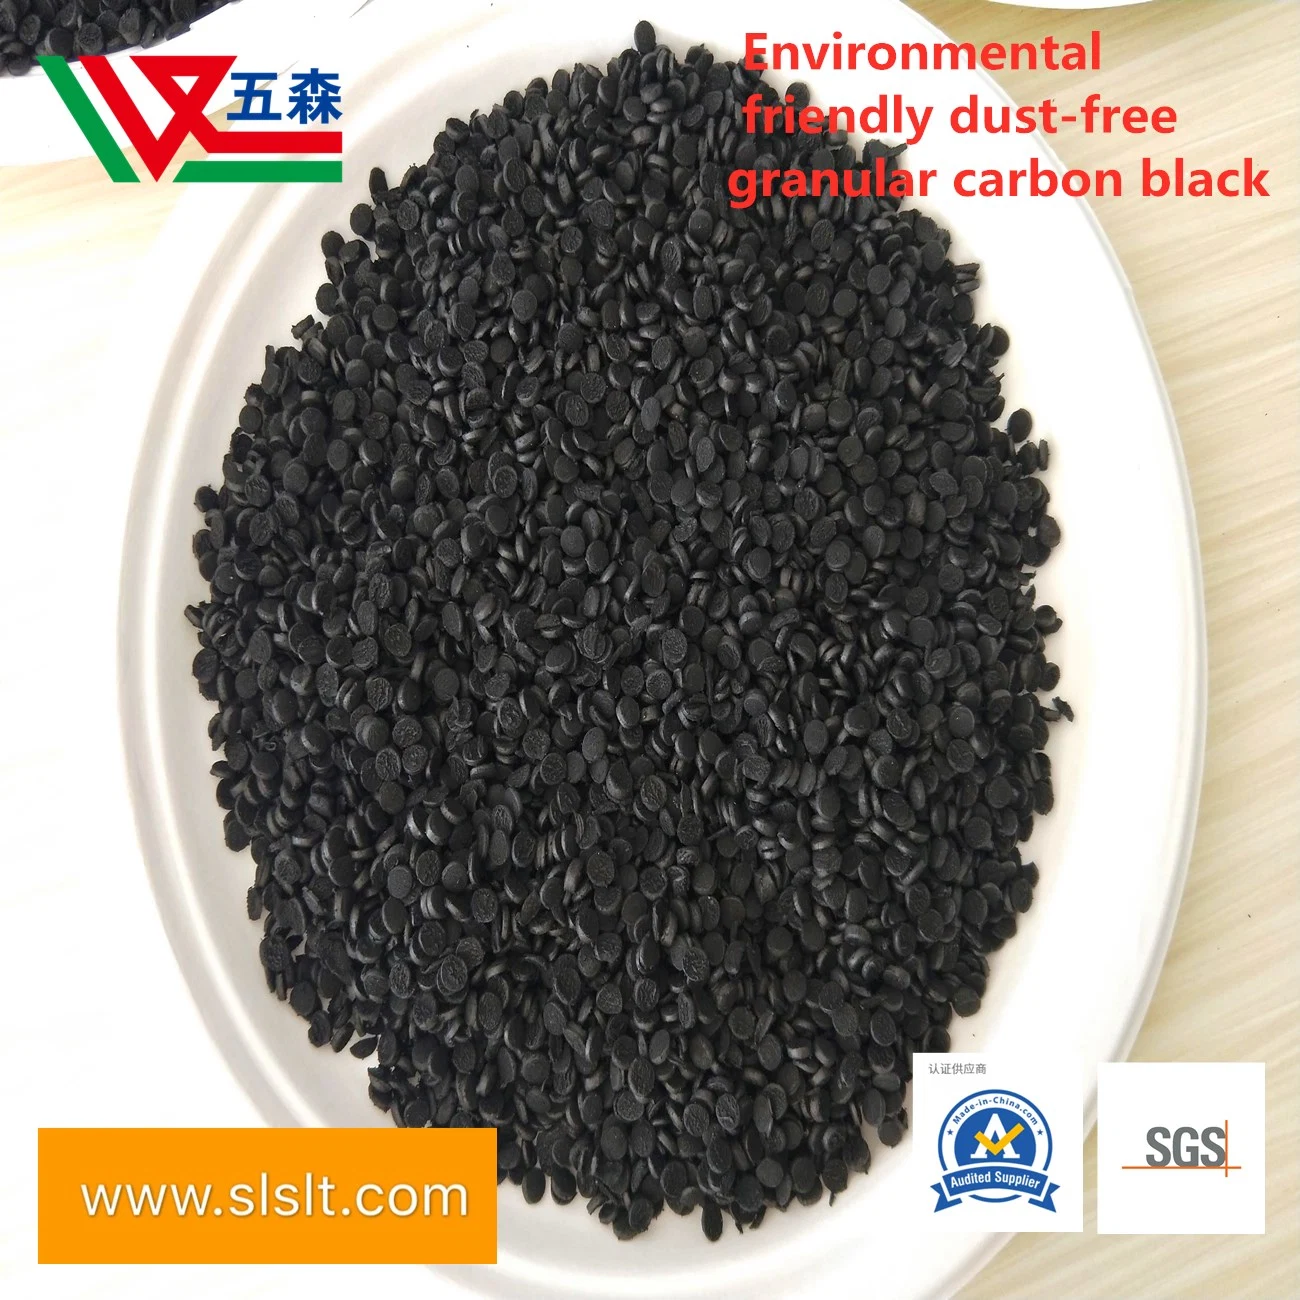 Manufacturer Wholesale/Supplier Dust-Free Carbon Black N220, N330 Environmental Protection Dust-Free Rubber Products Quality Assurance